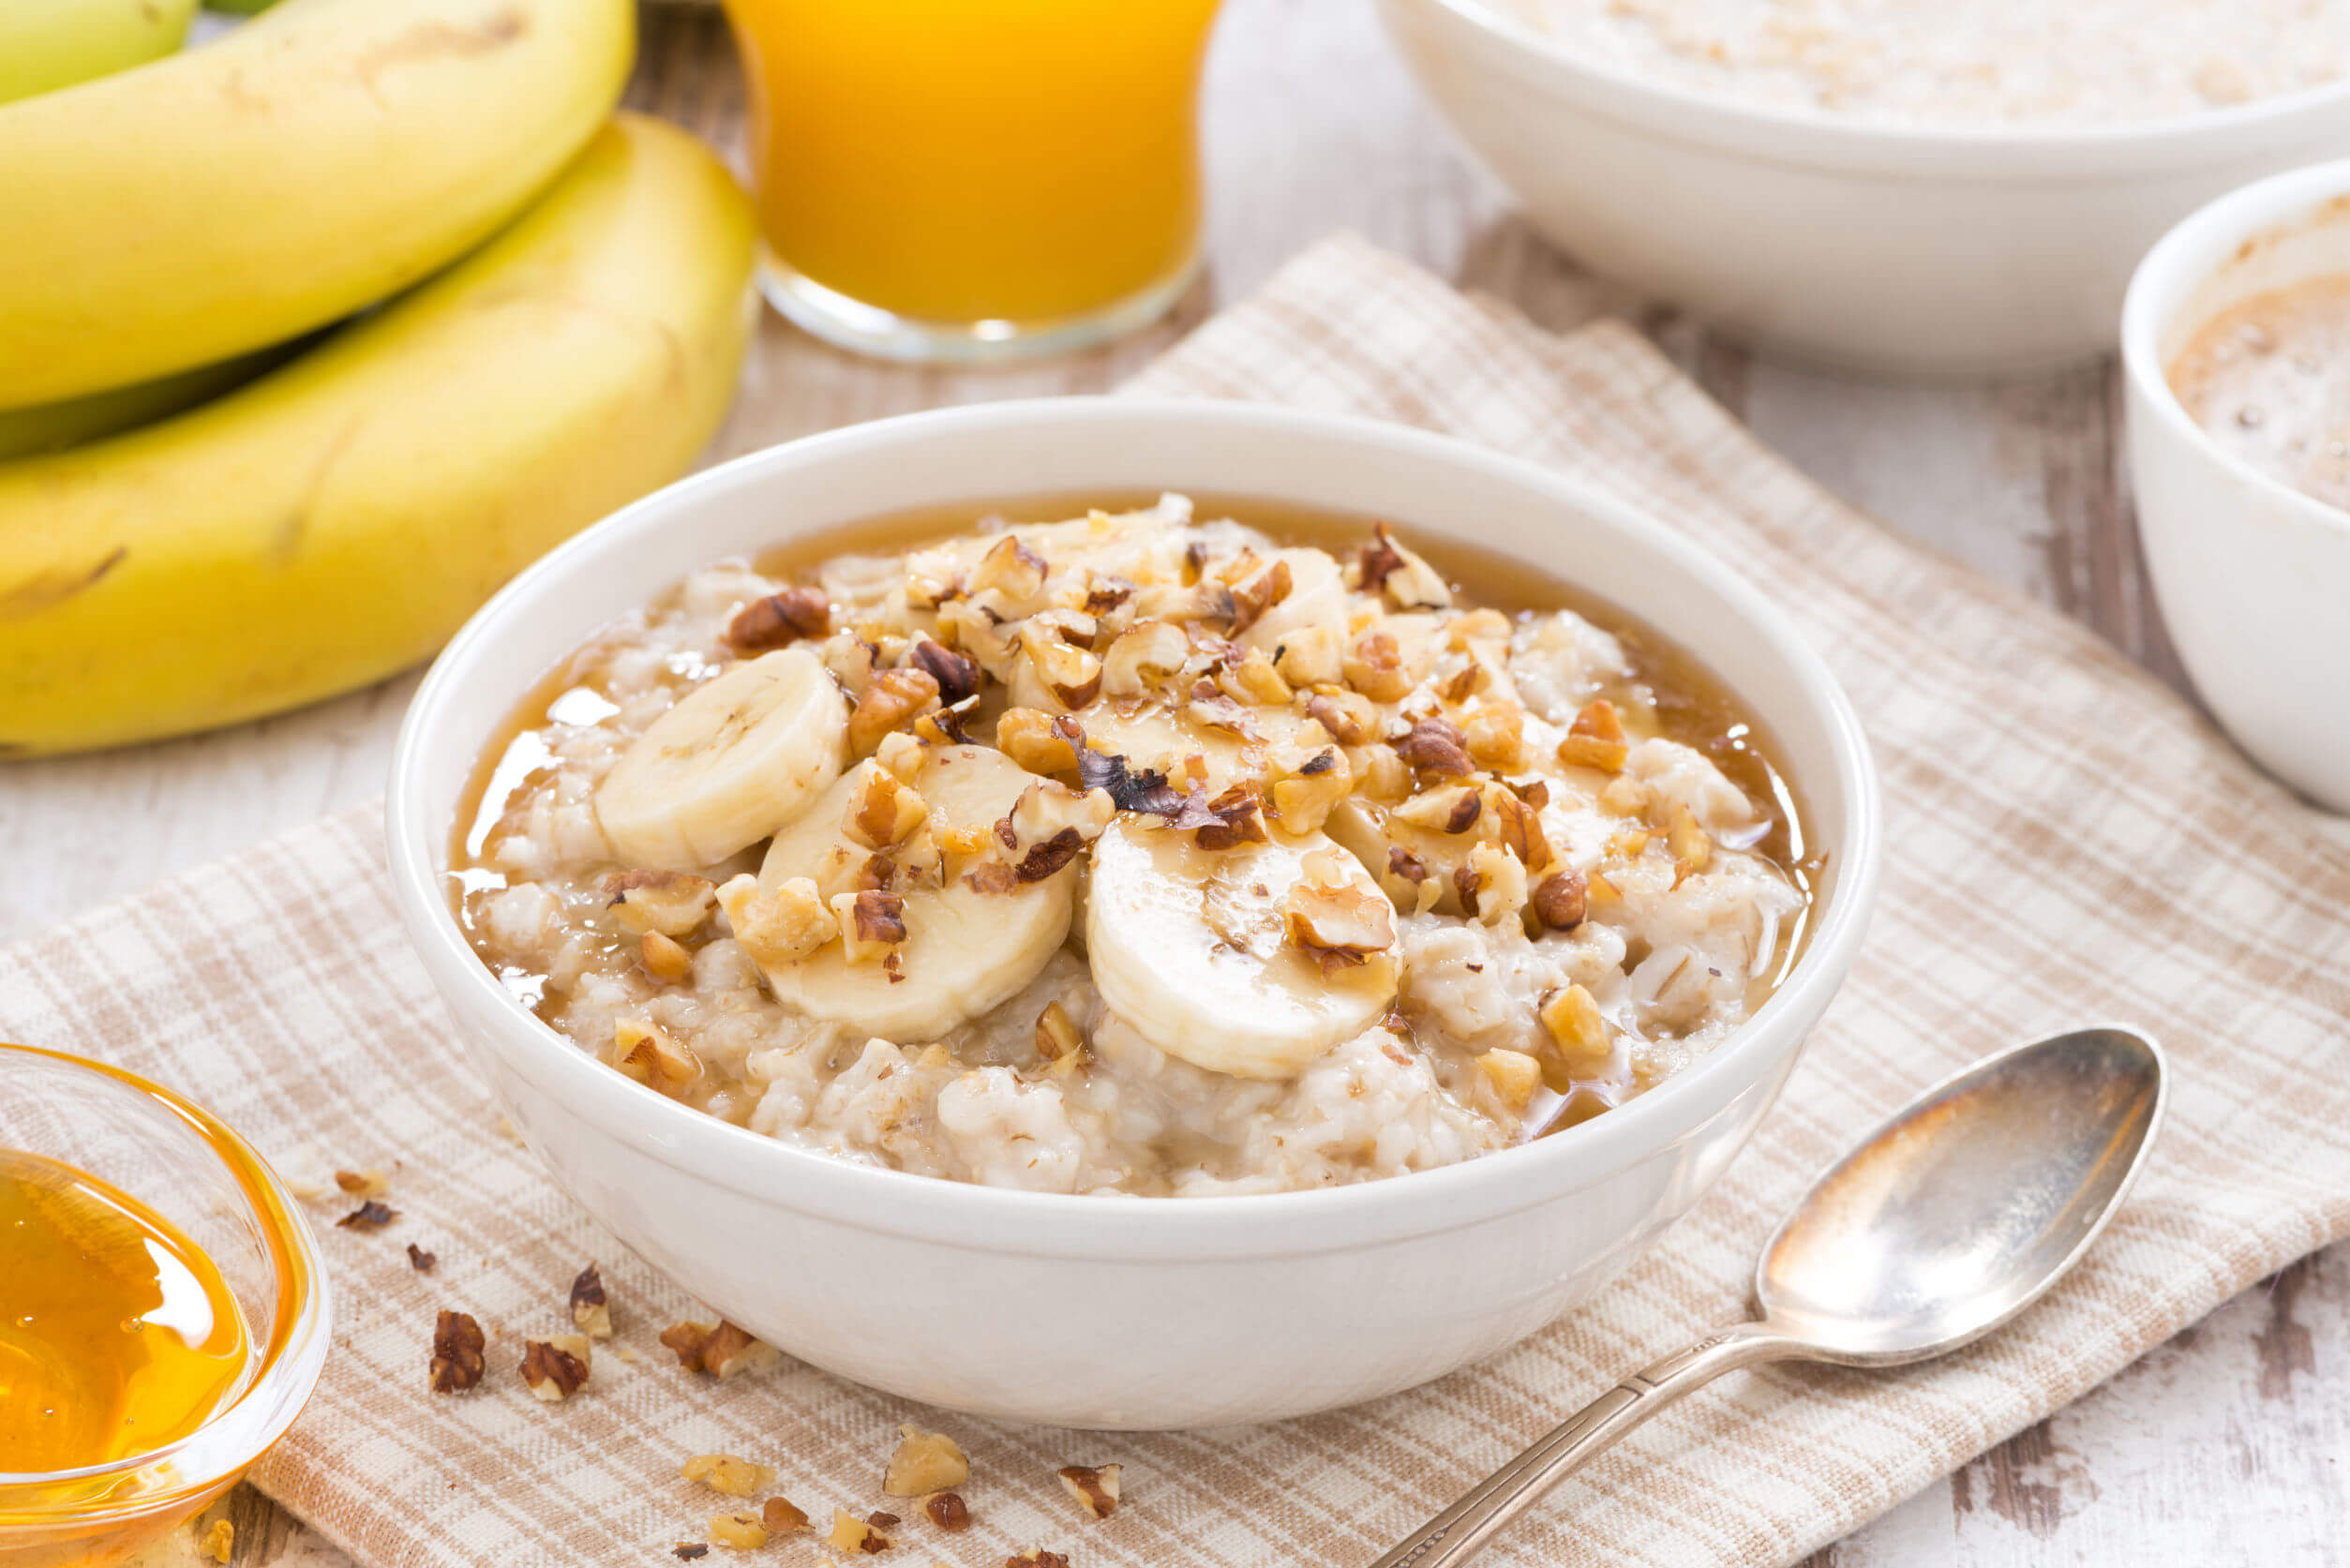 One of the best healthy breakfasts is a good bowl of oatmeal.